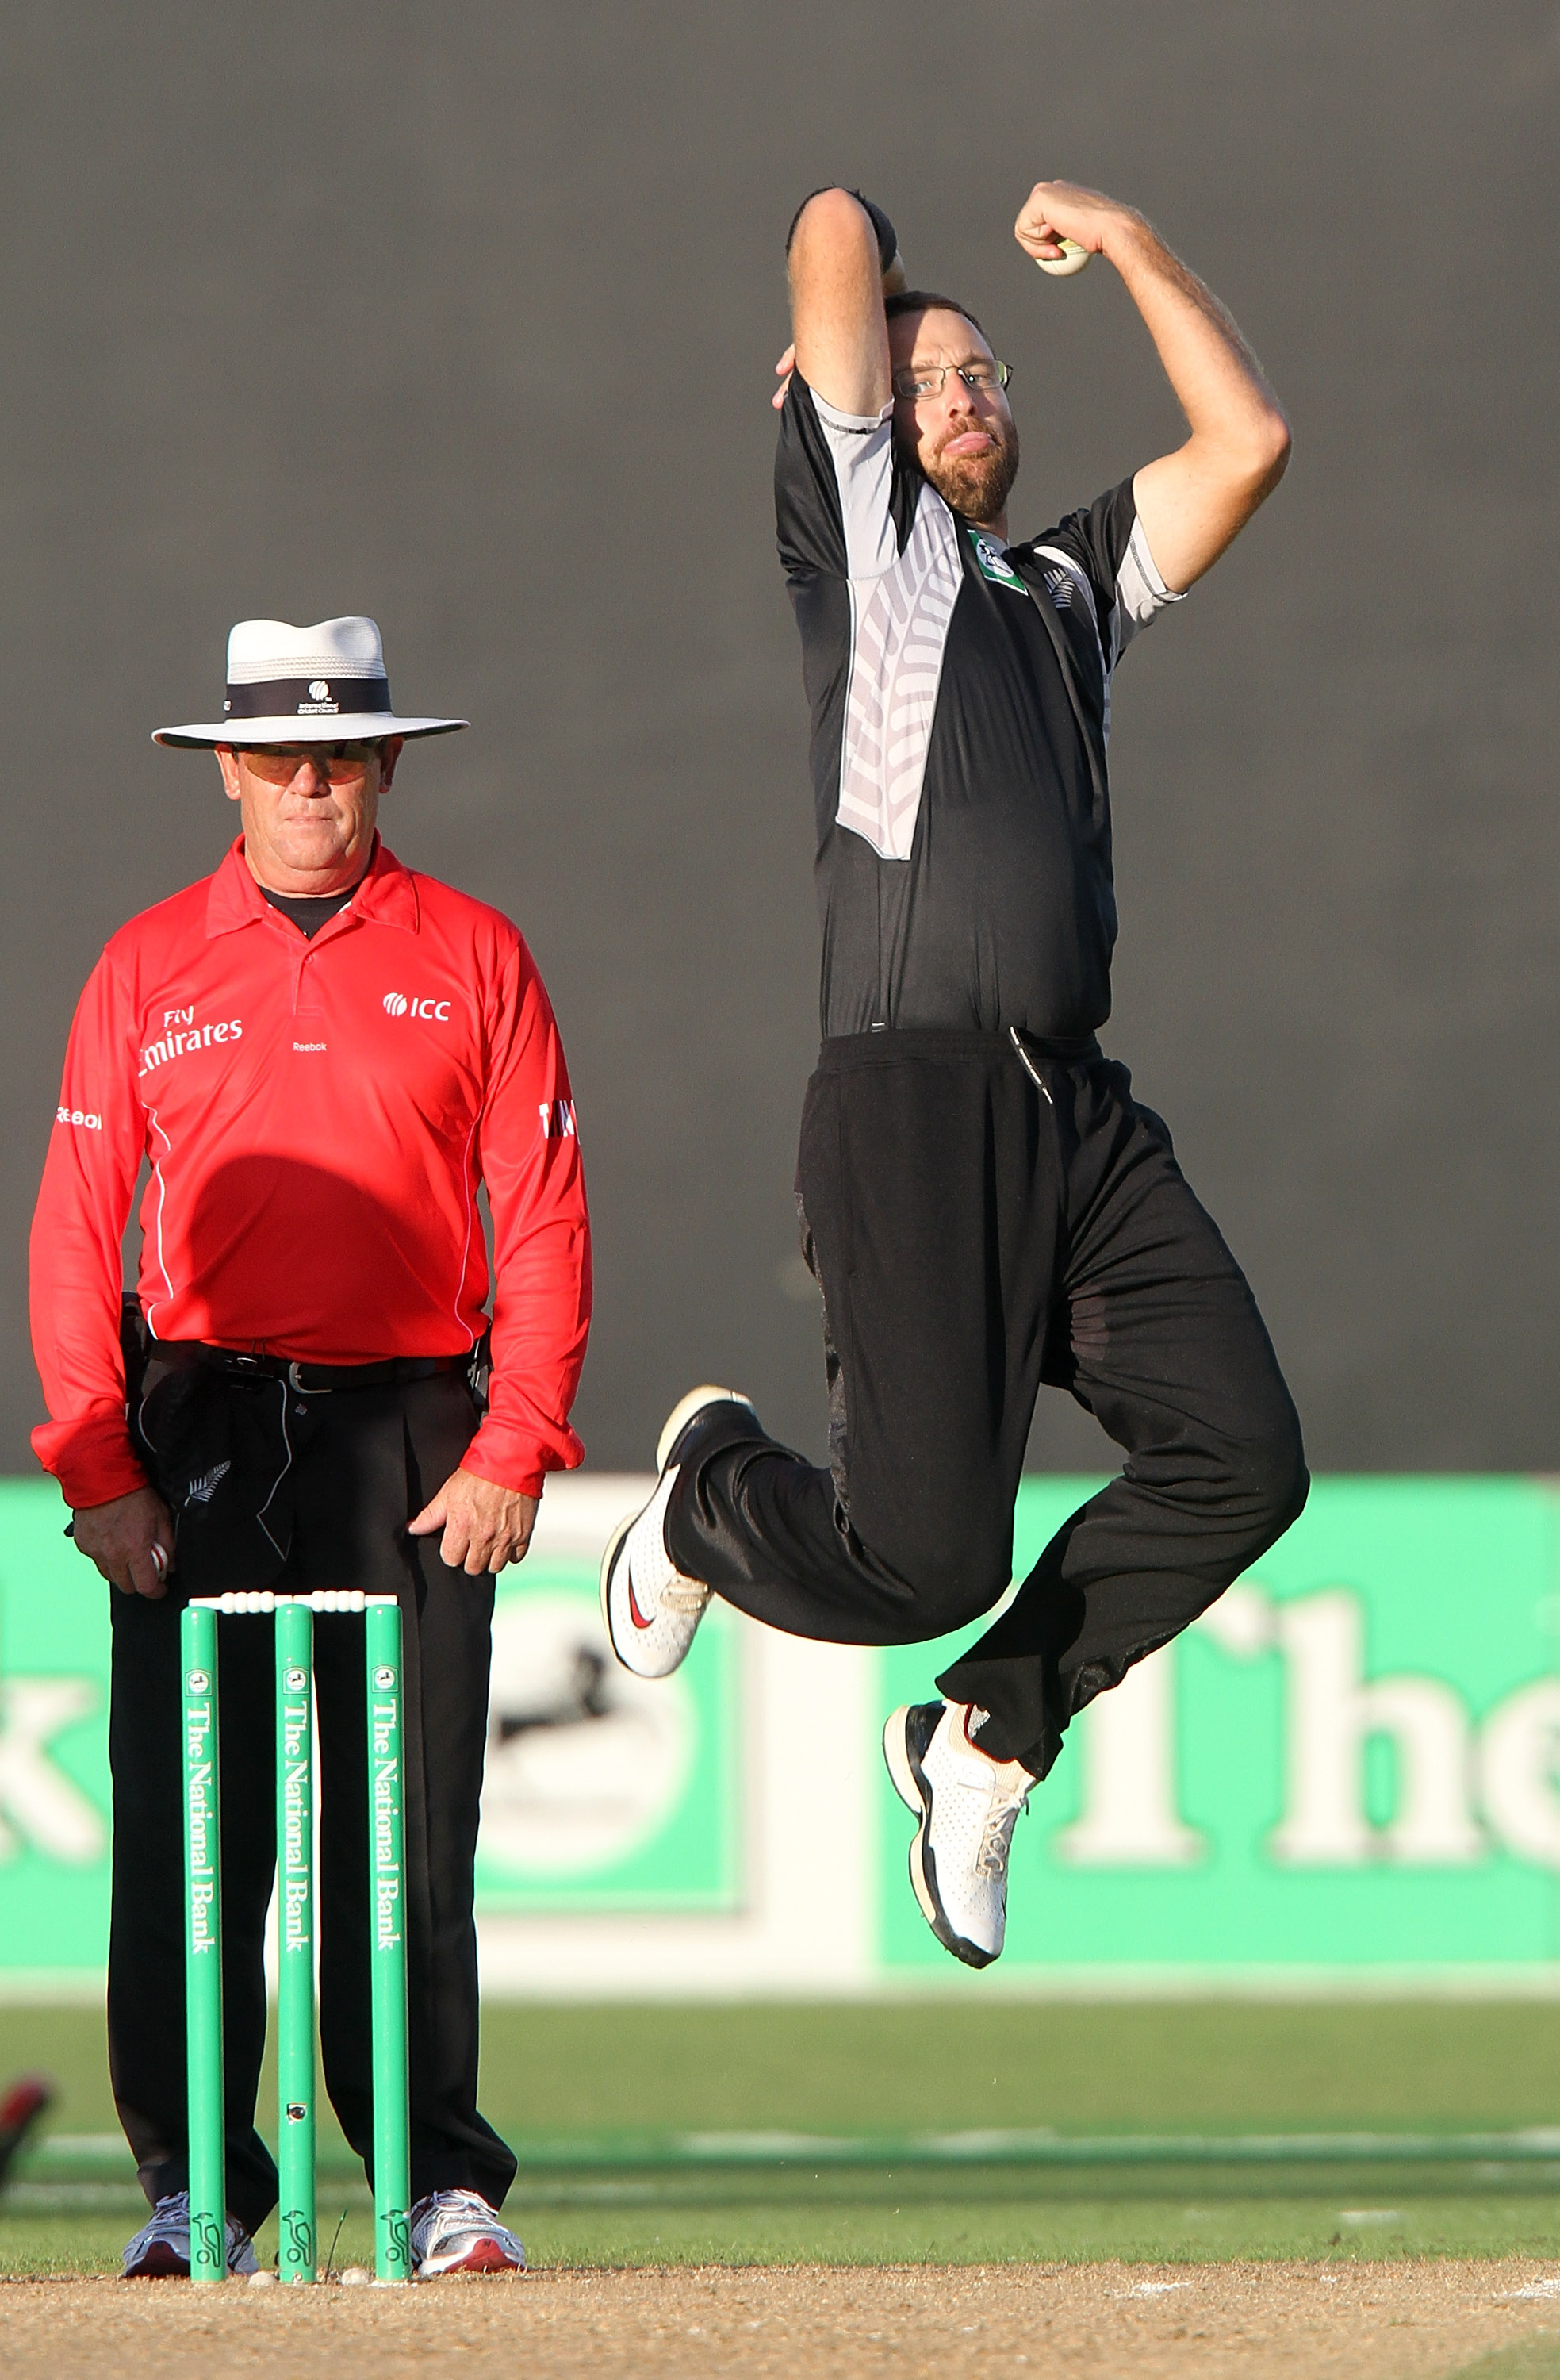 NAPIER, NEW ZEALAND - FEBRUARY 01:  Captain of New Zealand Daniel Vettori bowls during game four of the One Day International Series between New Zealand and Pakistan at McLean Park on February 1, 2011 in Napier, New Zealand.  (Photo by Marty Melville/Gett